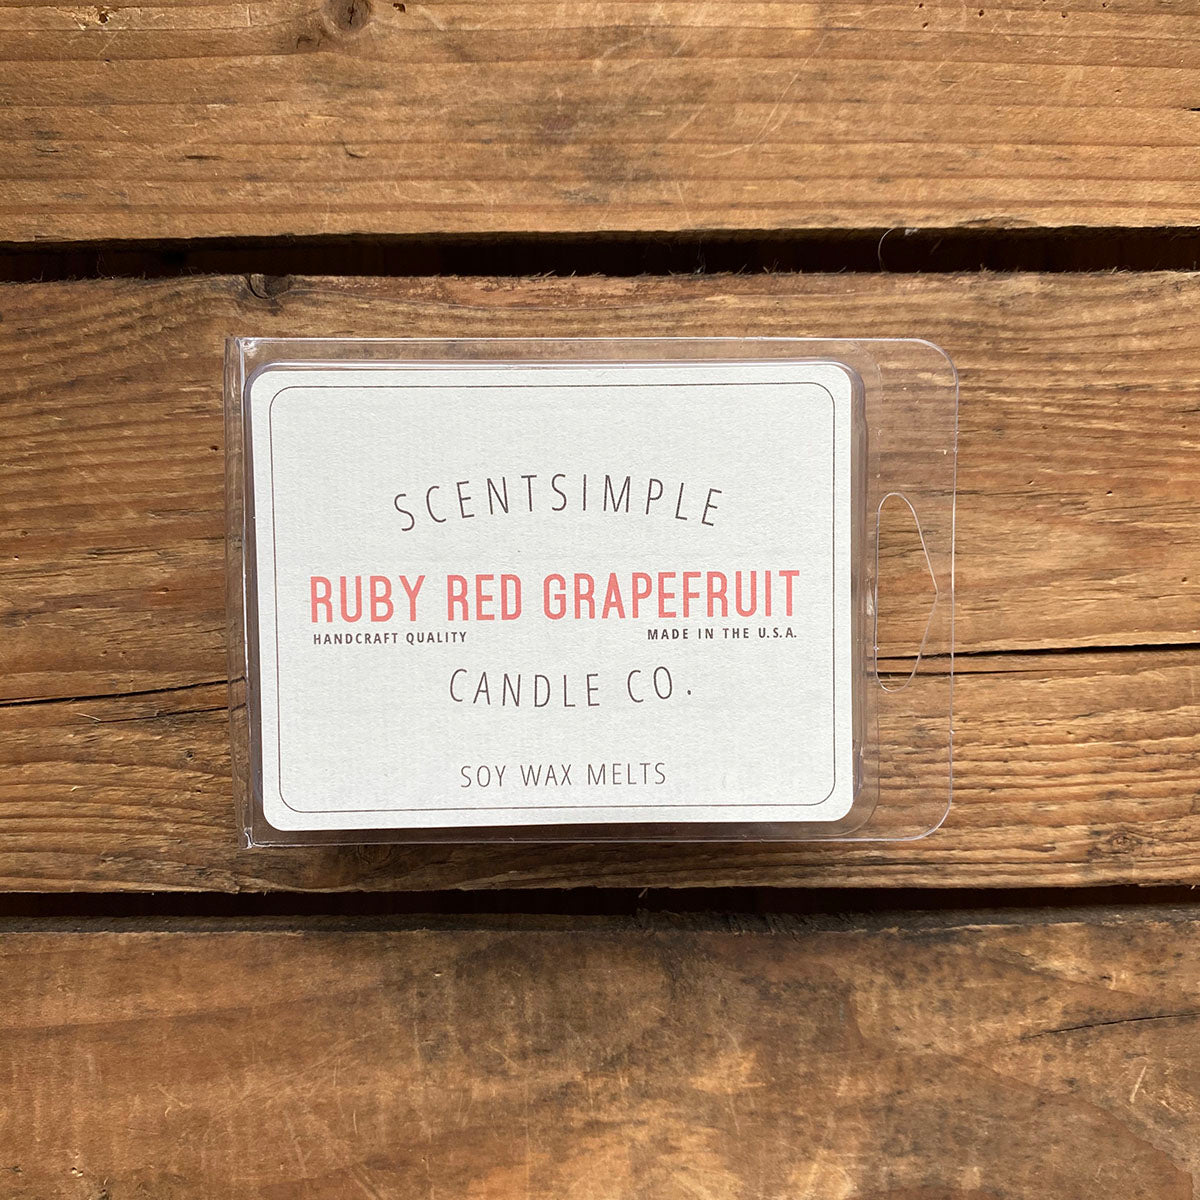 Ruby Red Grapefruit Scented Soy Wax Melts